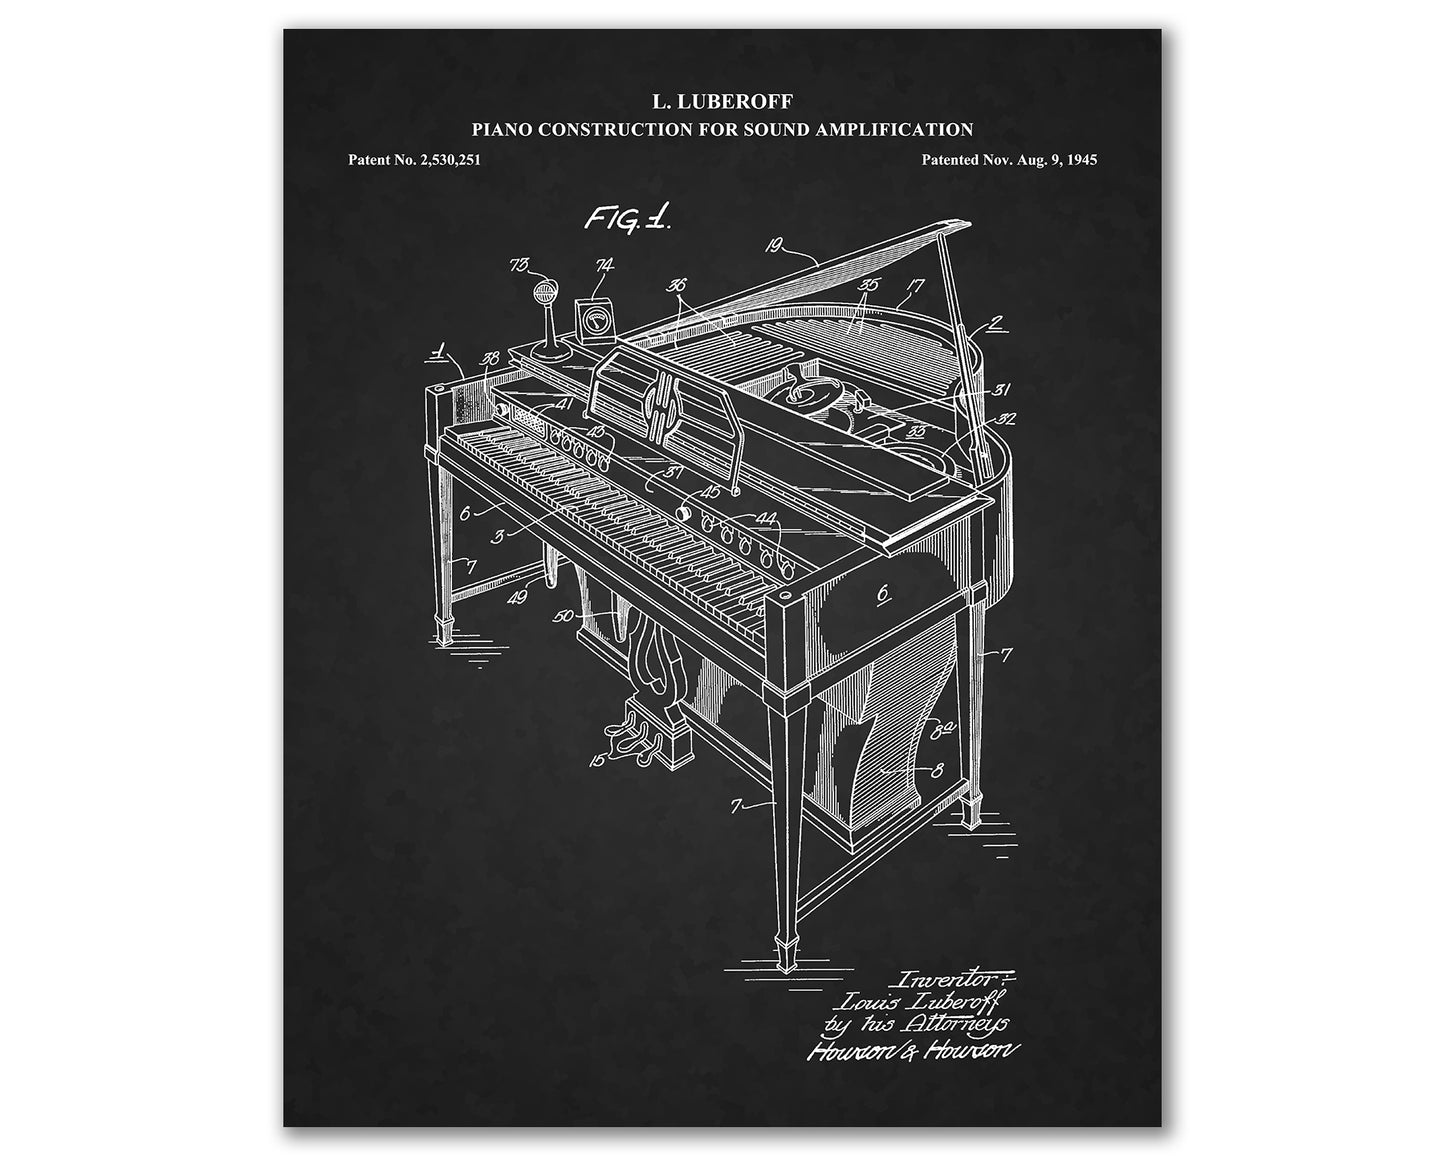 Grand Piano Patent Drawings, Music Studio Wall Art Poster, Great Vintage Room Decor, Art Prints, Musician Decor Gifts 03052